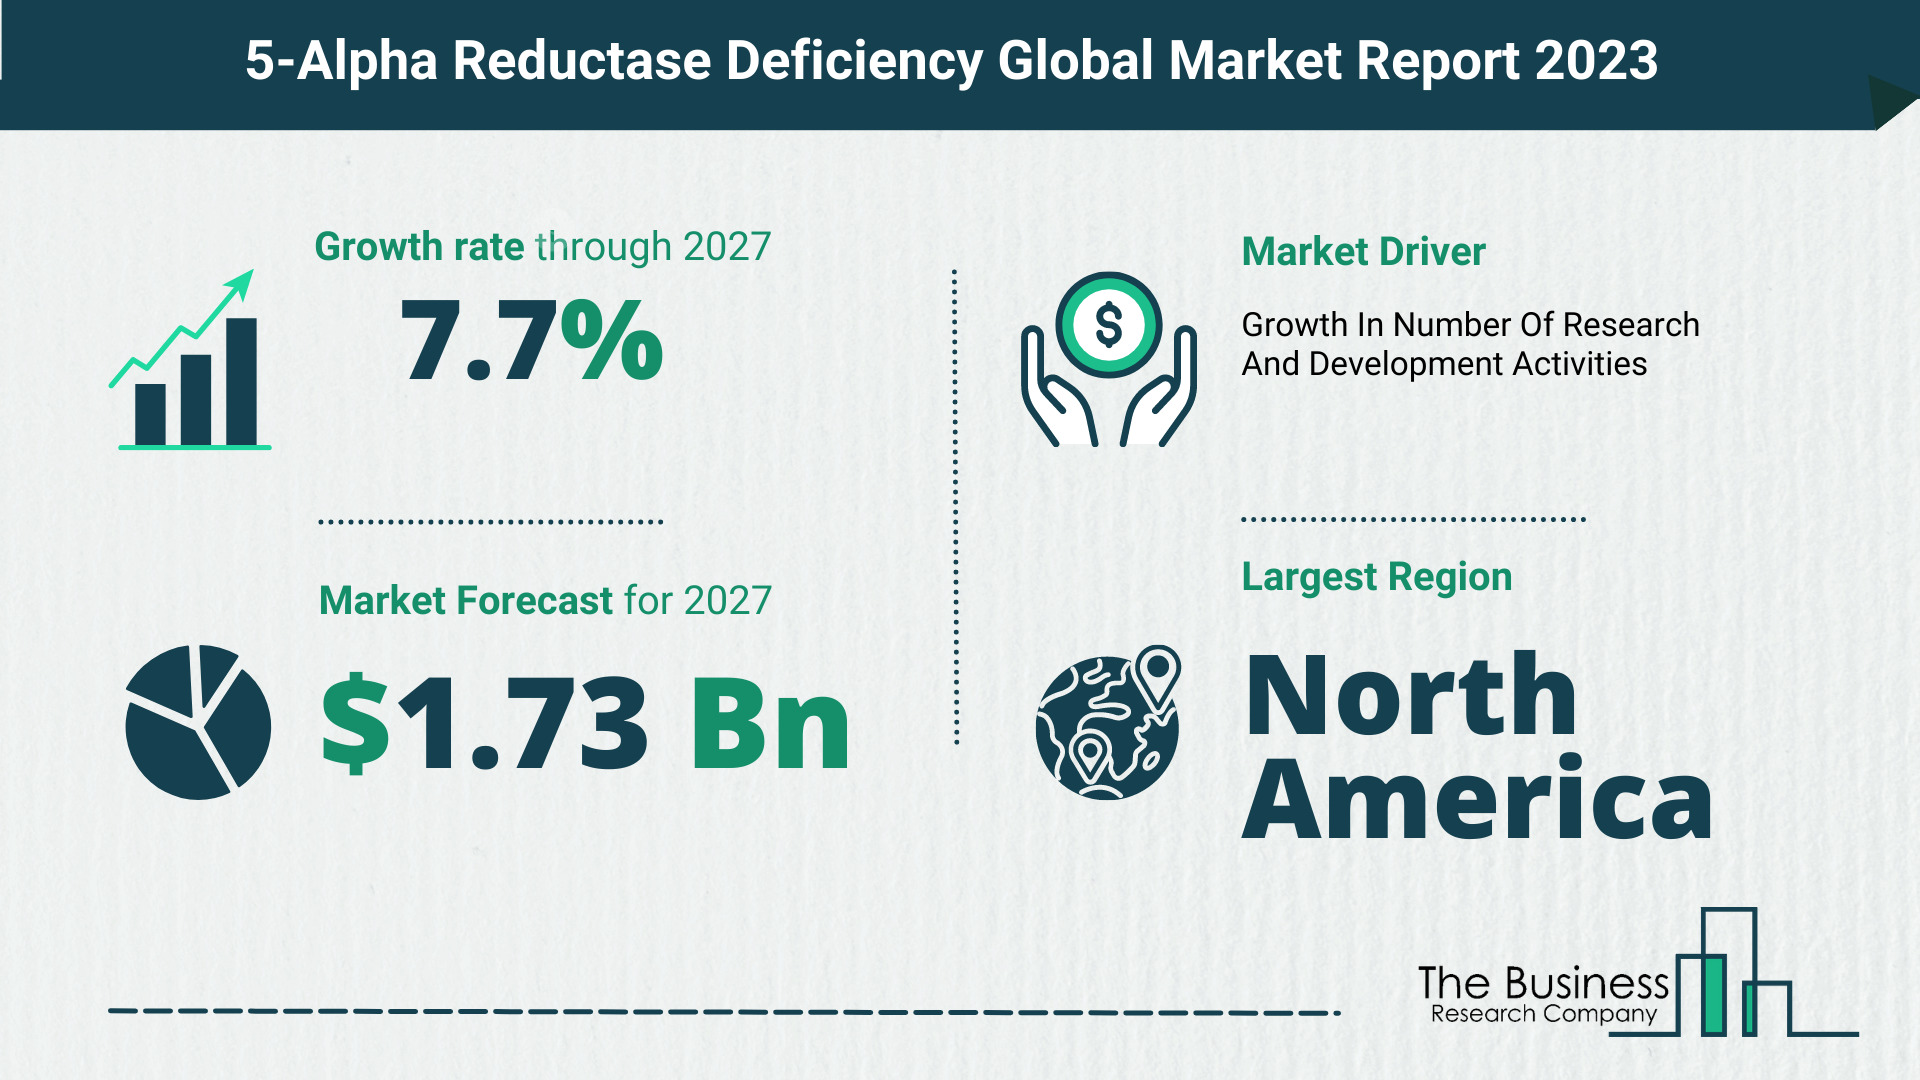 How Will The 5-Alpha Reductase Deficiency Market Globally Expand In 2023?